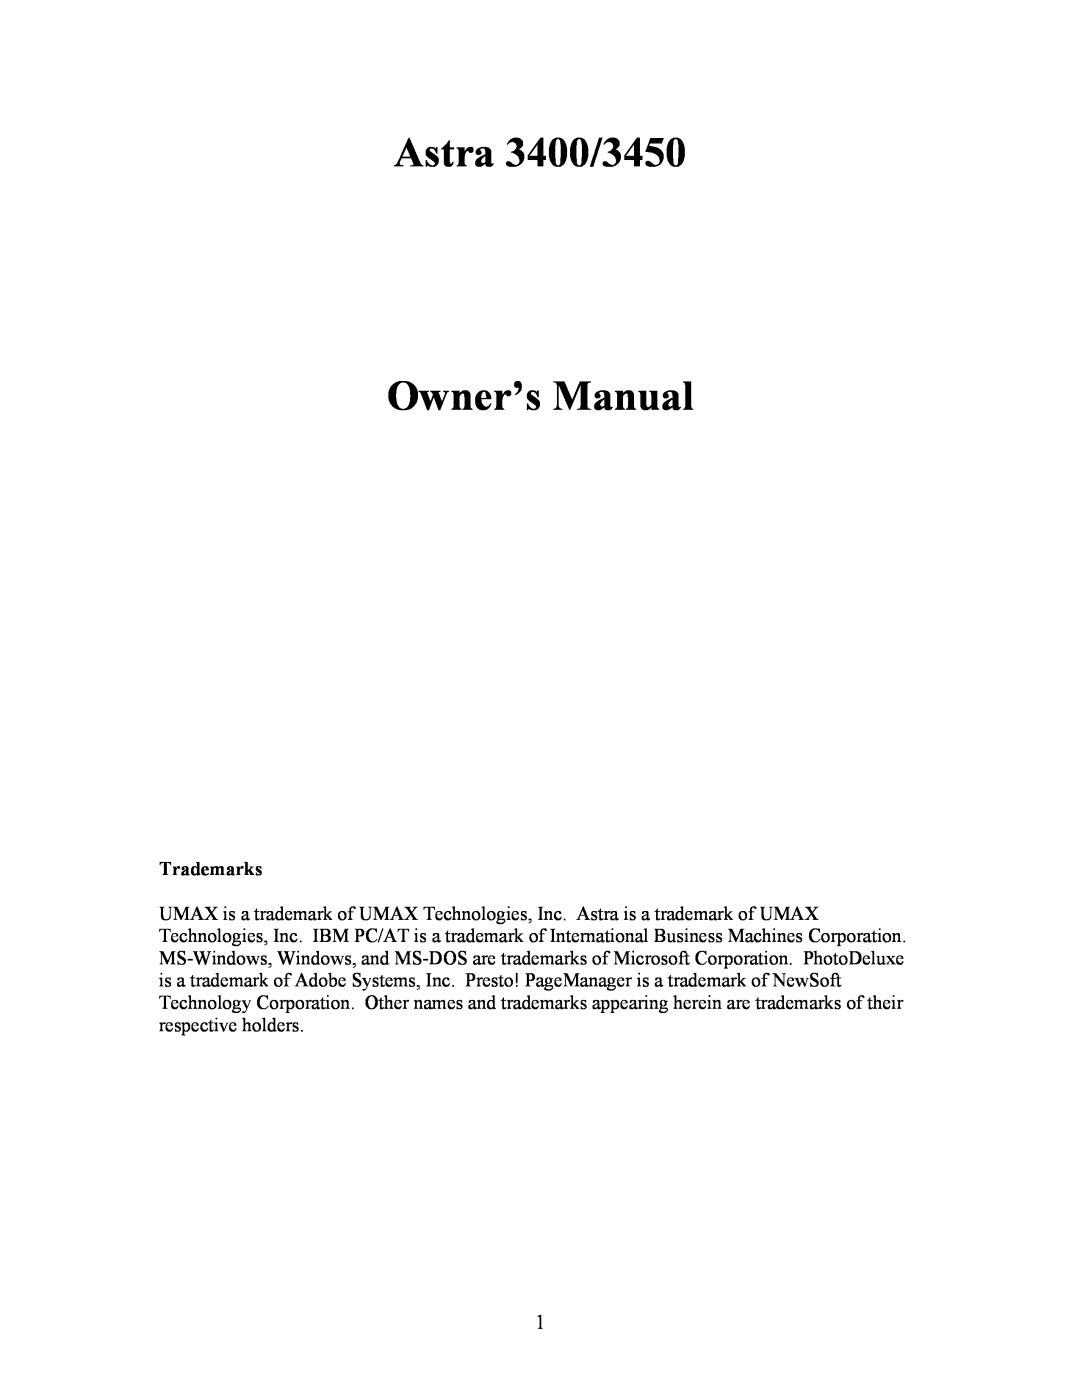 UMAX Technologies owner manual Trademarks, Astra 3400/3450 Owner’s Manual 